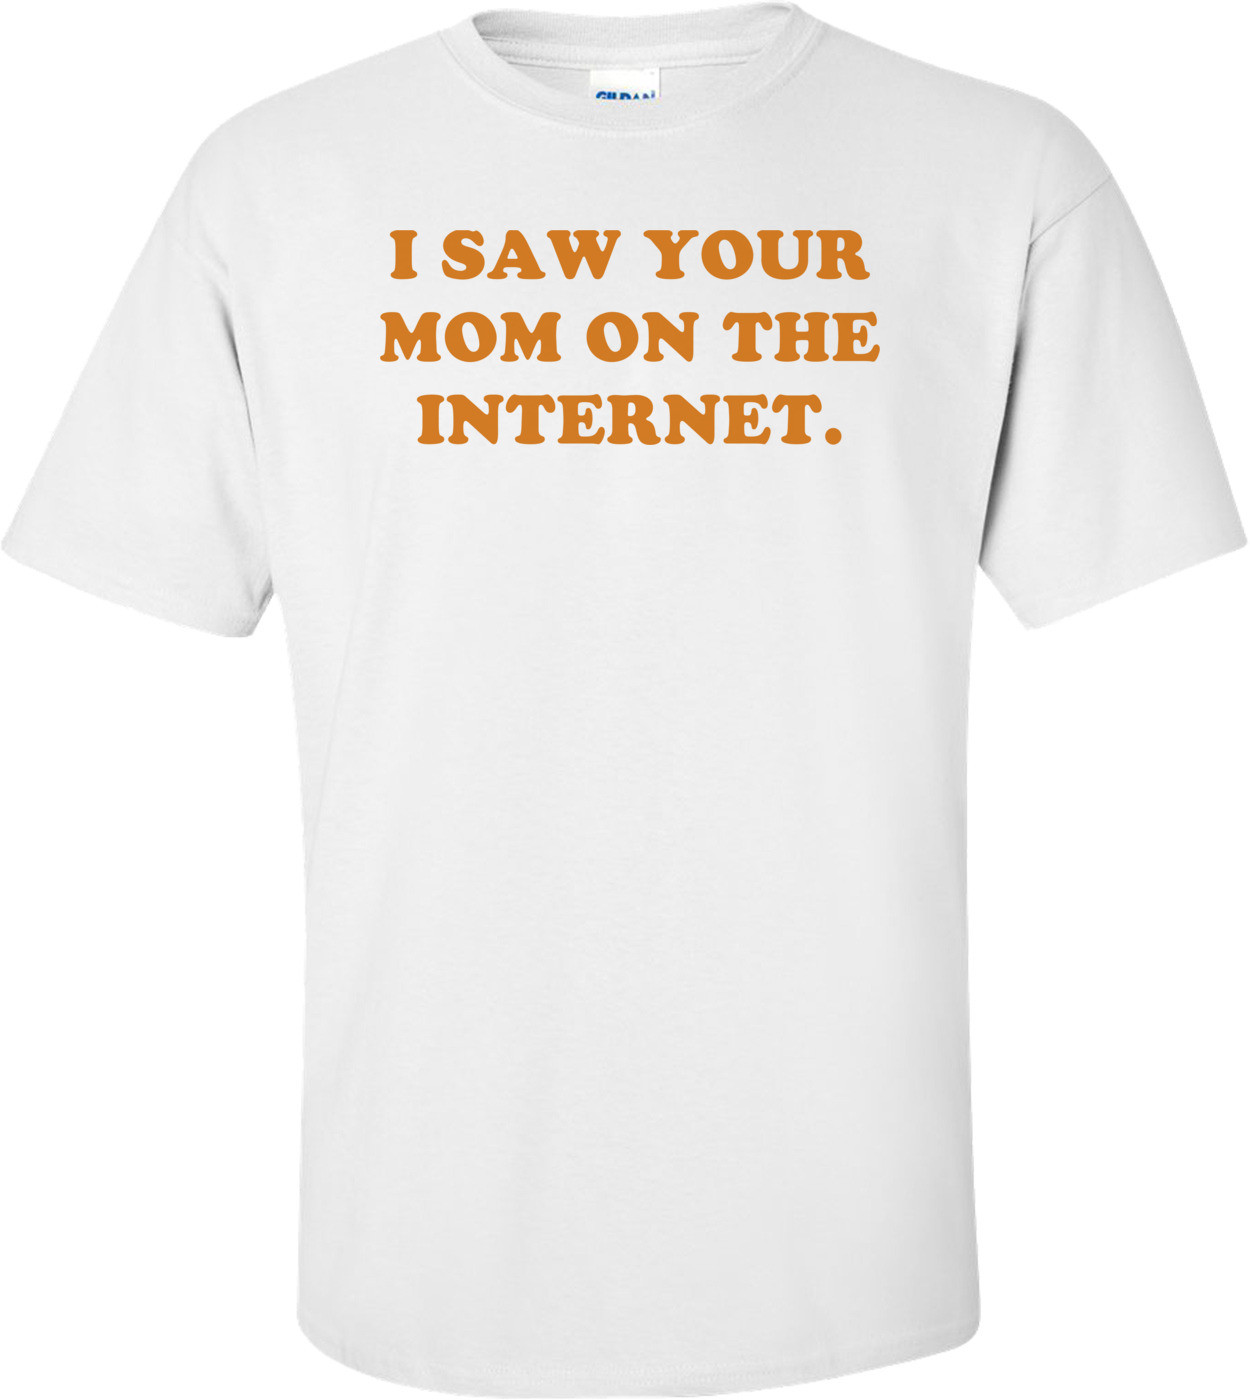 I SAW YOUR MOM ON THE INTERNET.